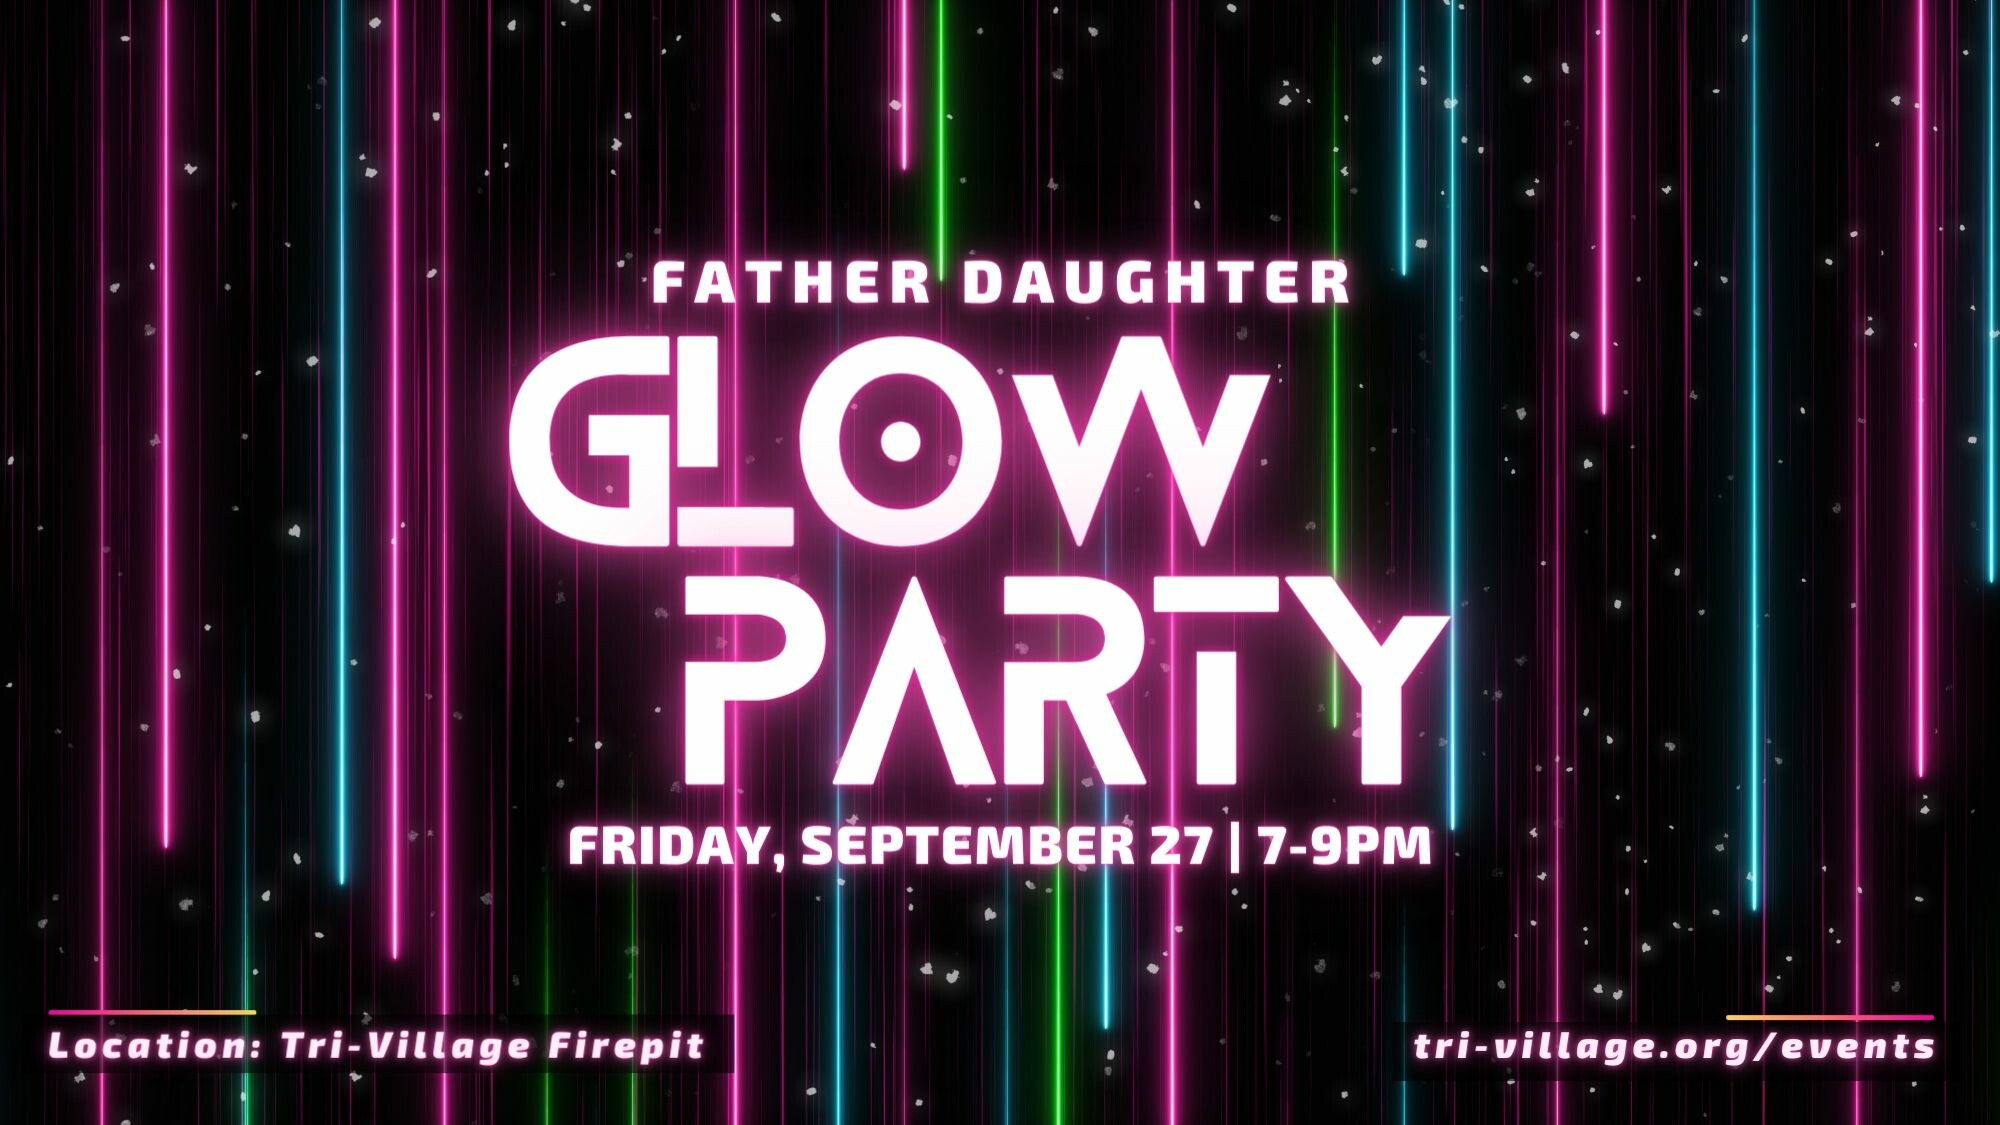 Father Daughter Glow Party